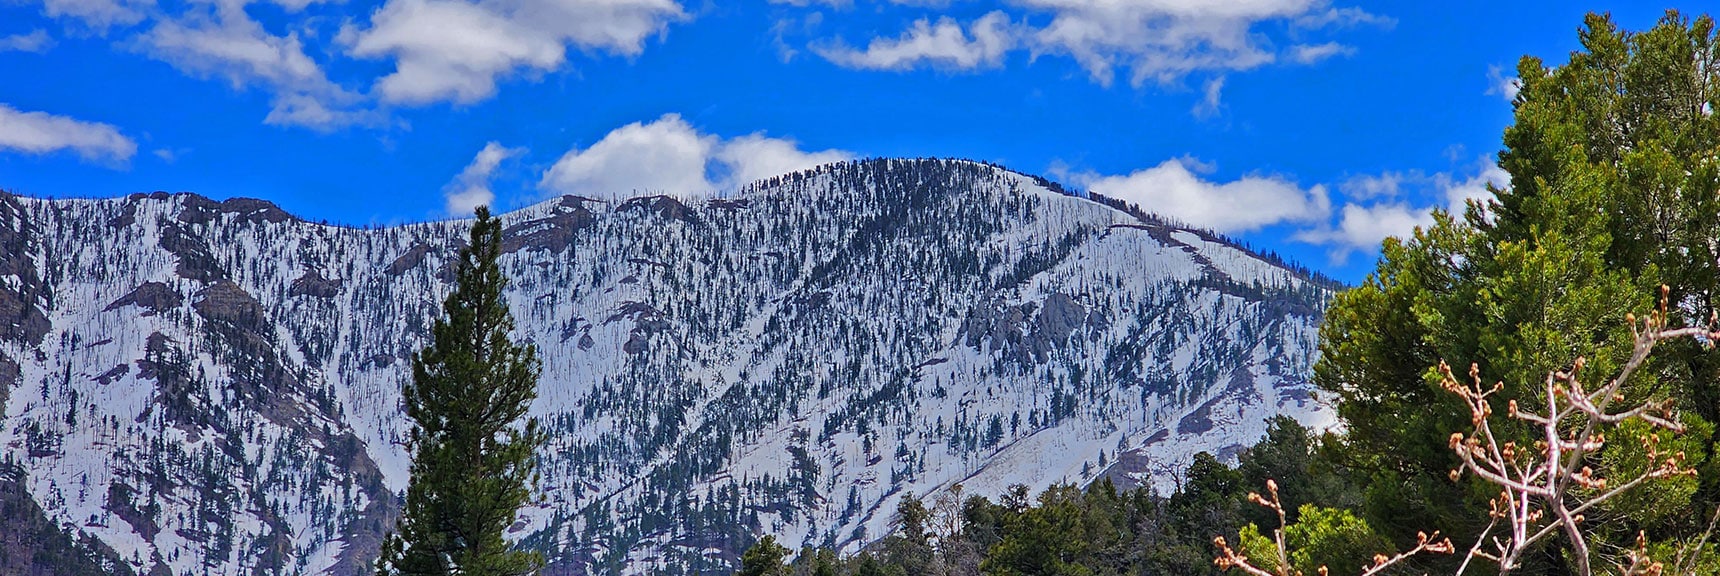 Harris Mountain with Western Summit Approach Ridge to the Right | Fletcher Canyon Trail | Mt Charleston Wilderness | Spring Mountains, Nevada